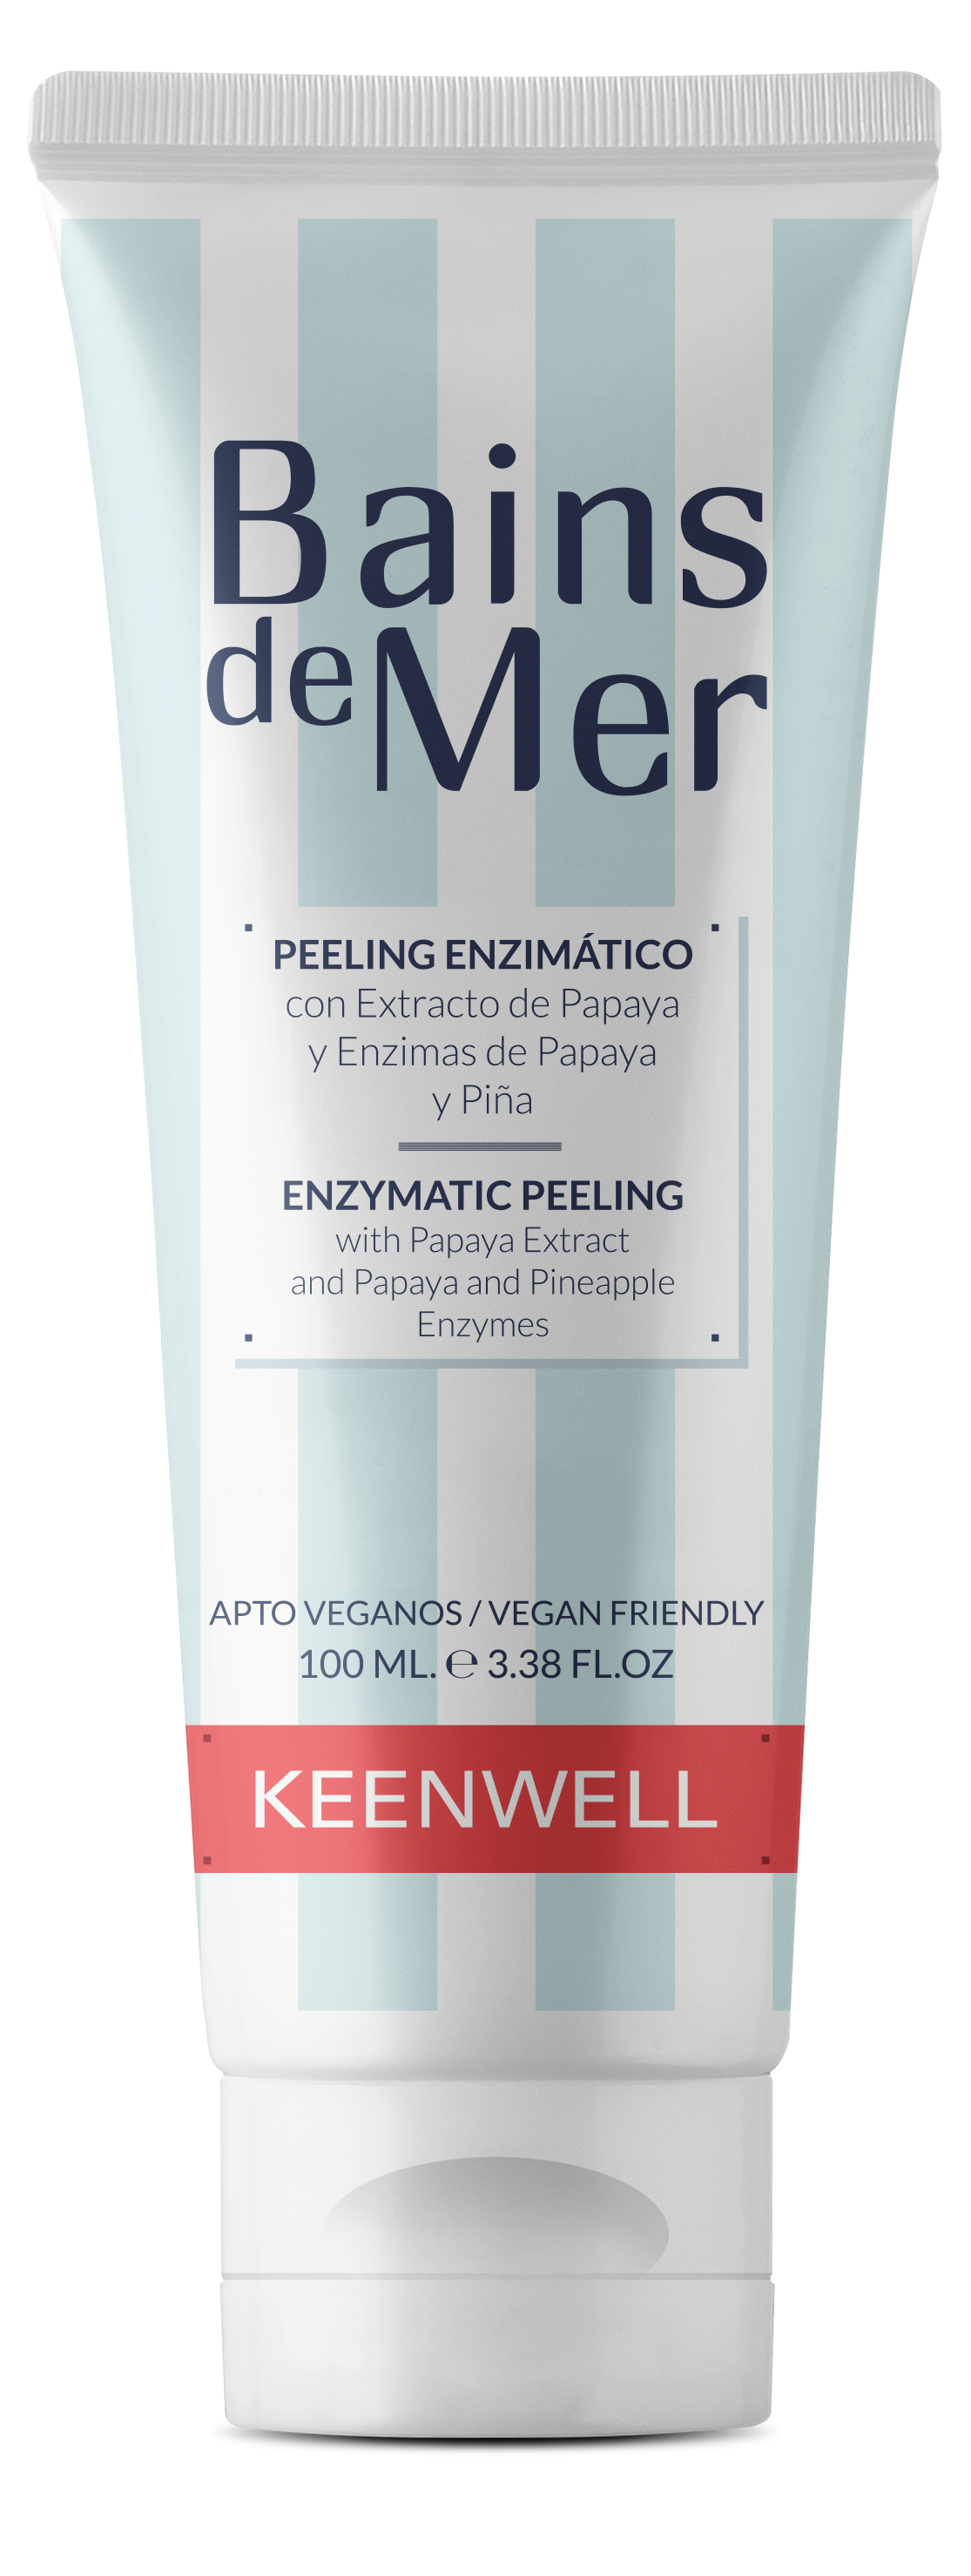 Anti Fatigue Eye Cream for Bags and Dark Circles 25 ml + FREE Enzymatic Peeling with Papaya Extract and Papaya and Pineapple Enzymes 100 ml